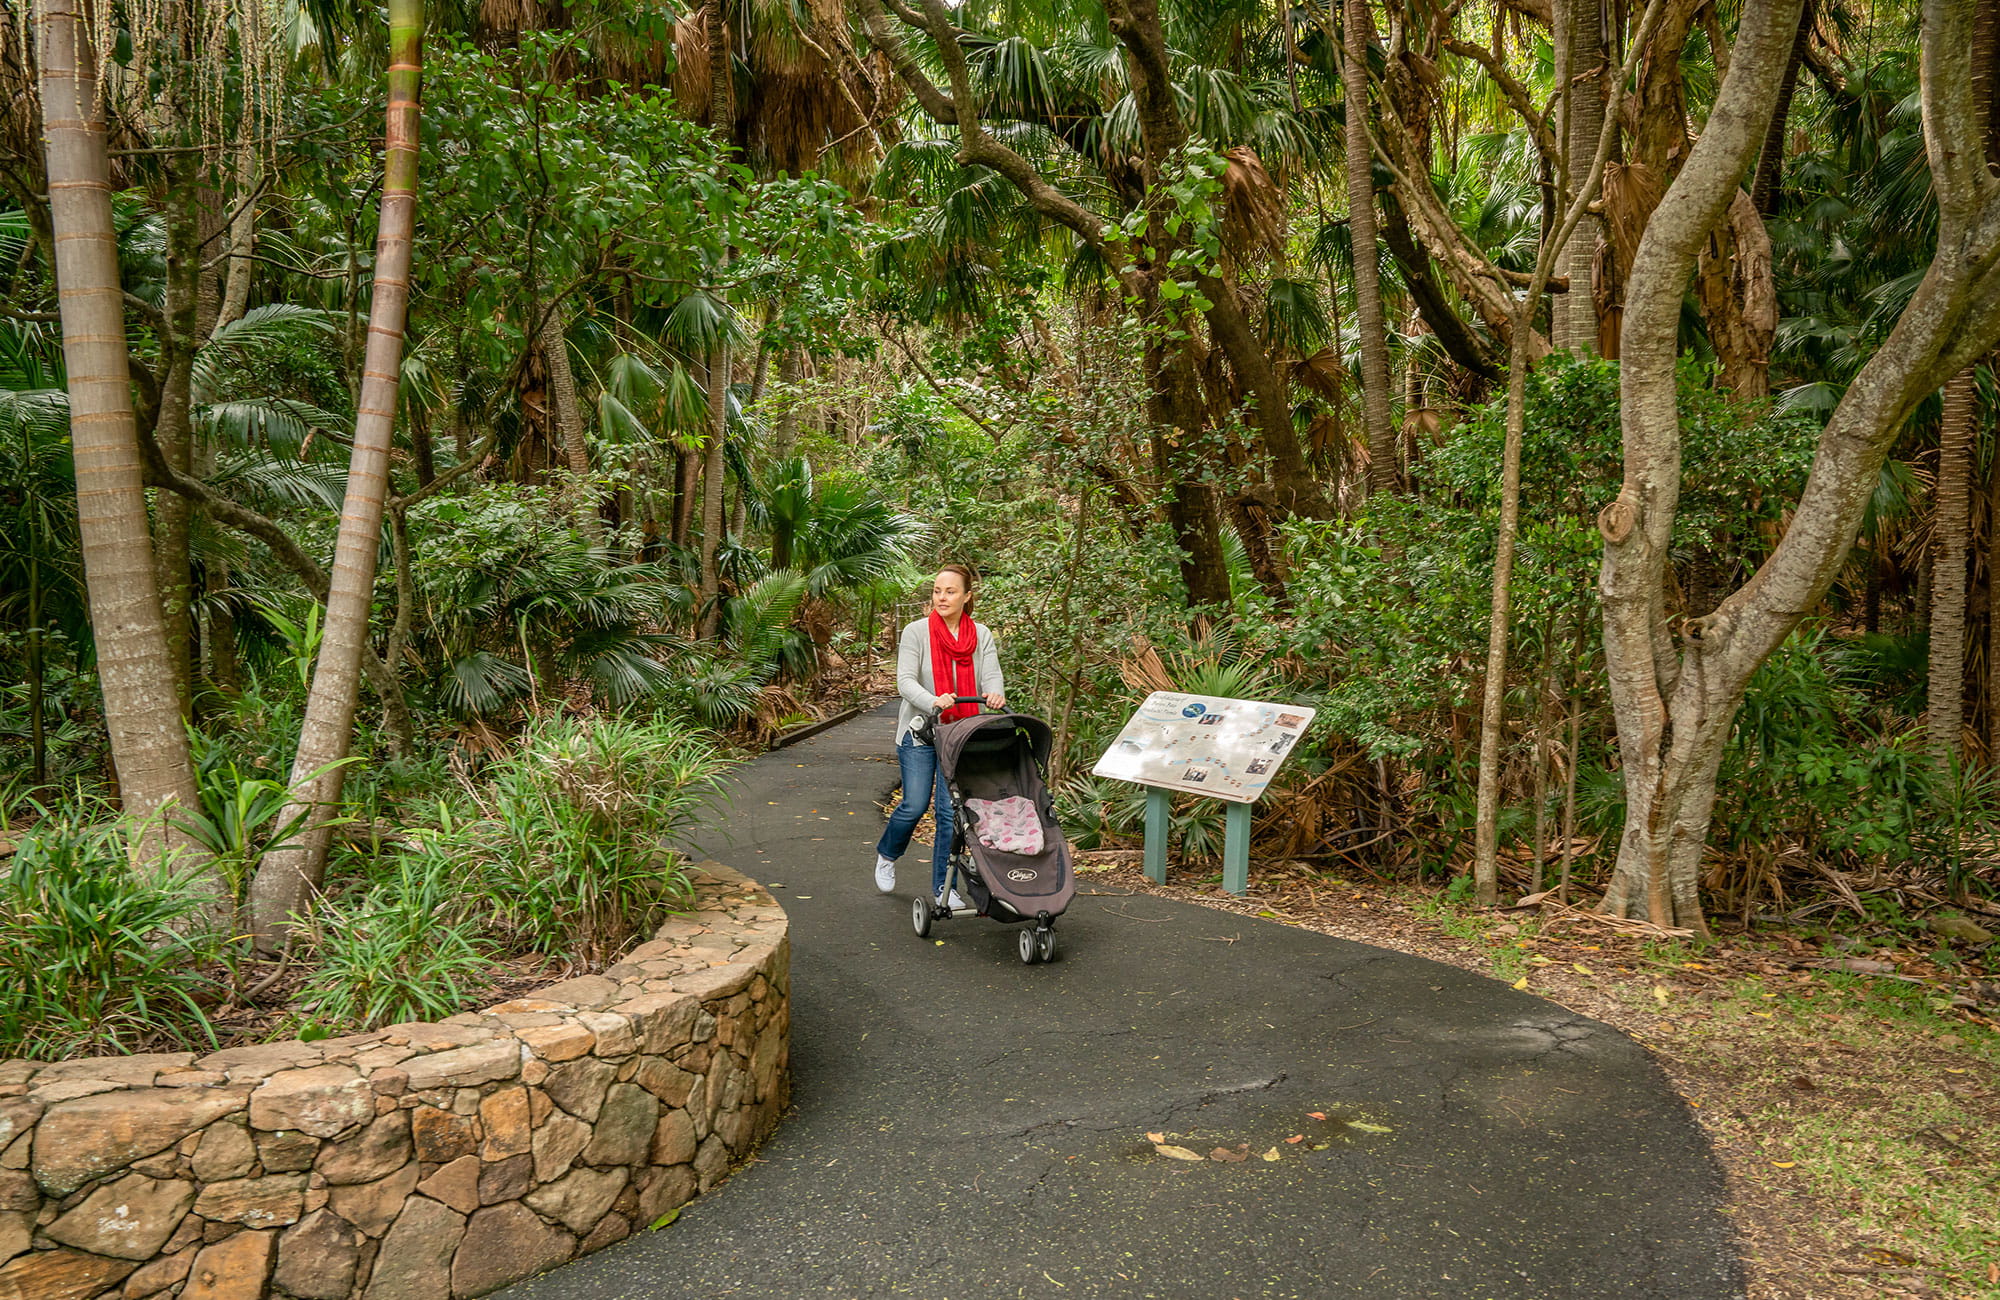 Palm Valley Currenbah walking track, in Cape Byron state Conservation Area. Photo: J Spencer/OEH